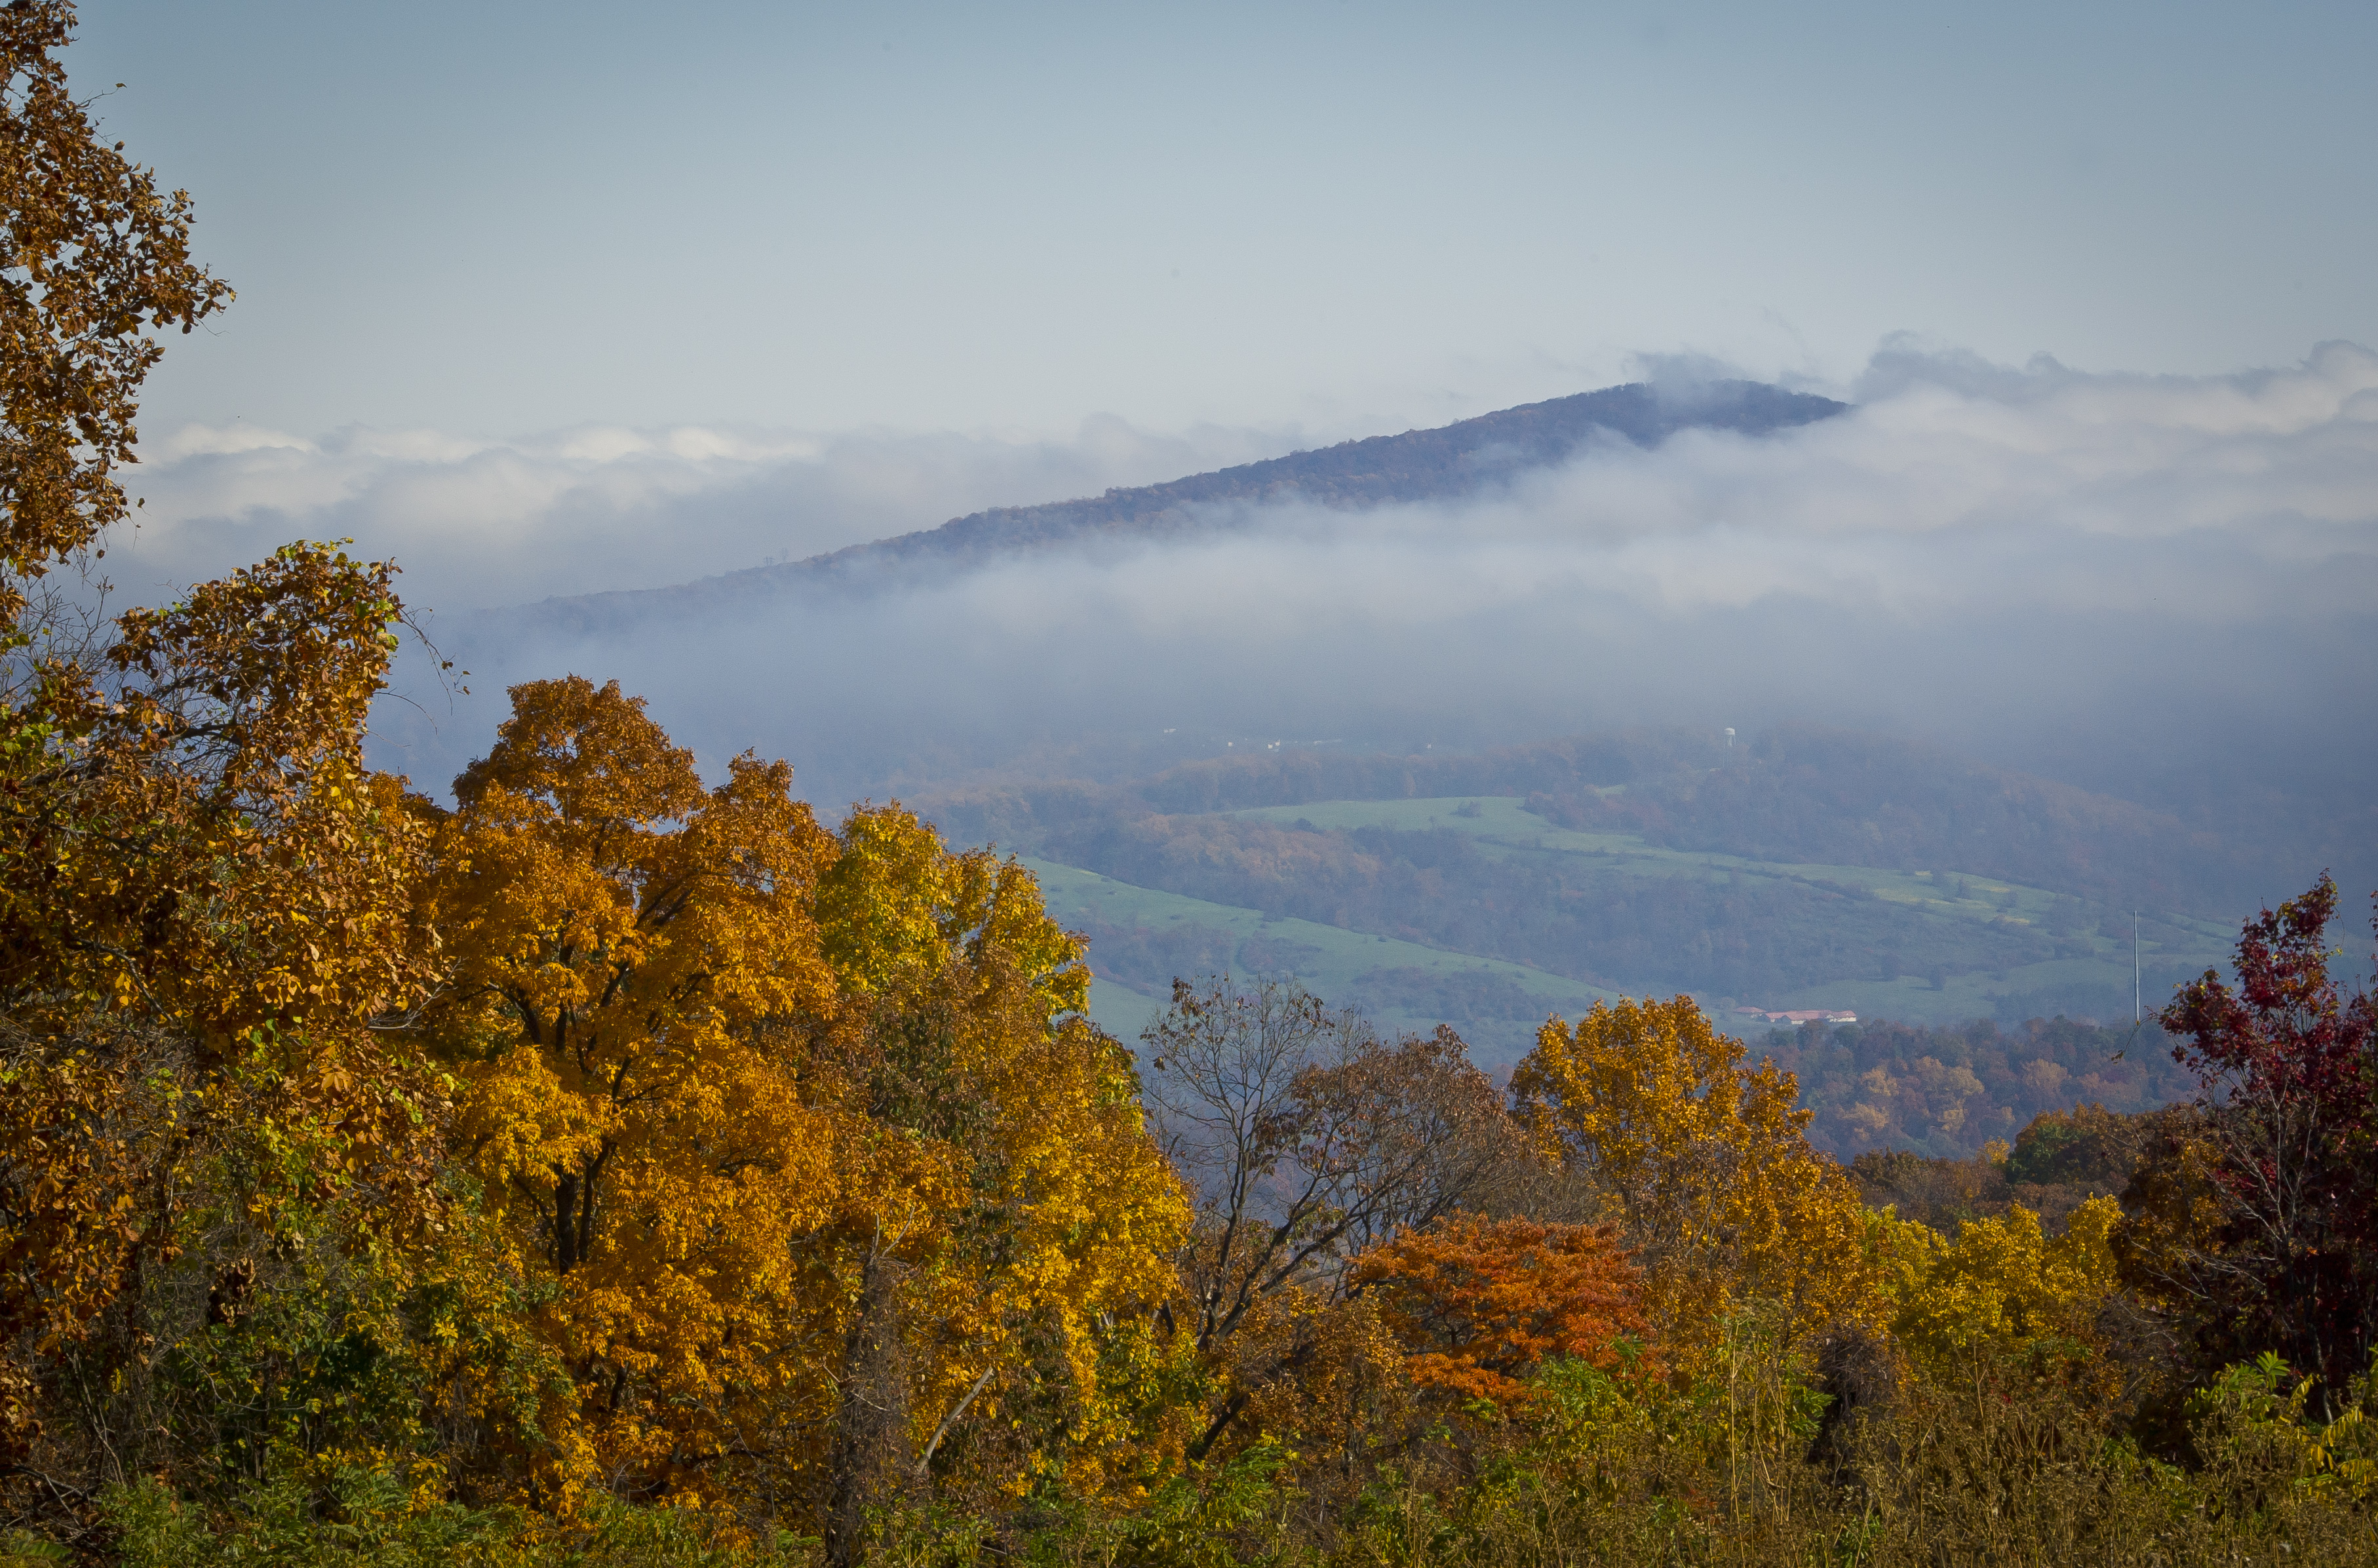 A view of the Blue Ridge Mountains emerging from the morning fog are seen from the Skyline Drive in Shenandoah National Park in Virginia, October 25, 2012. (MLADEN ANTONOV—AFP / Getty Images)